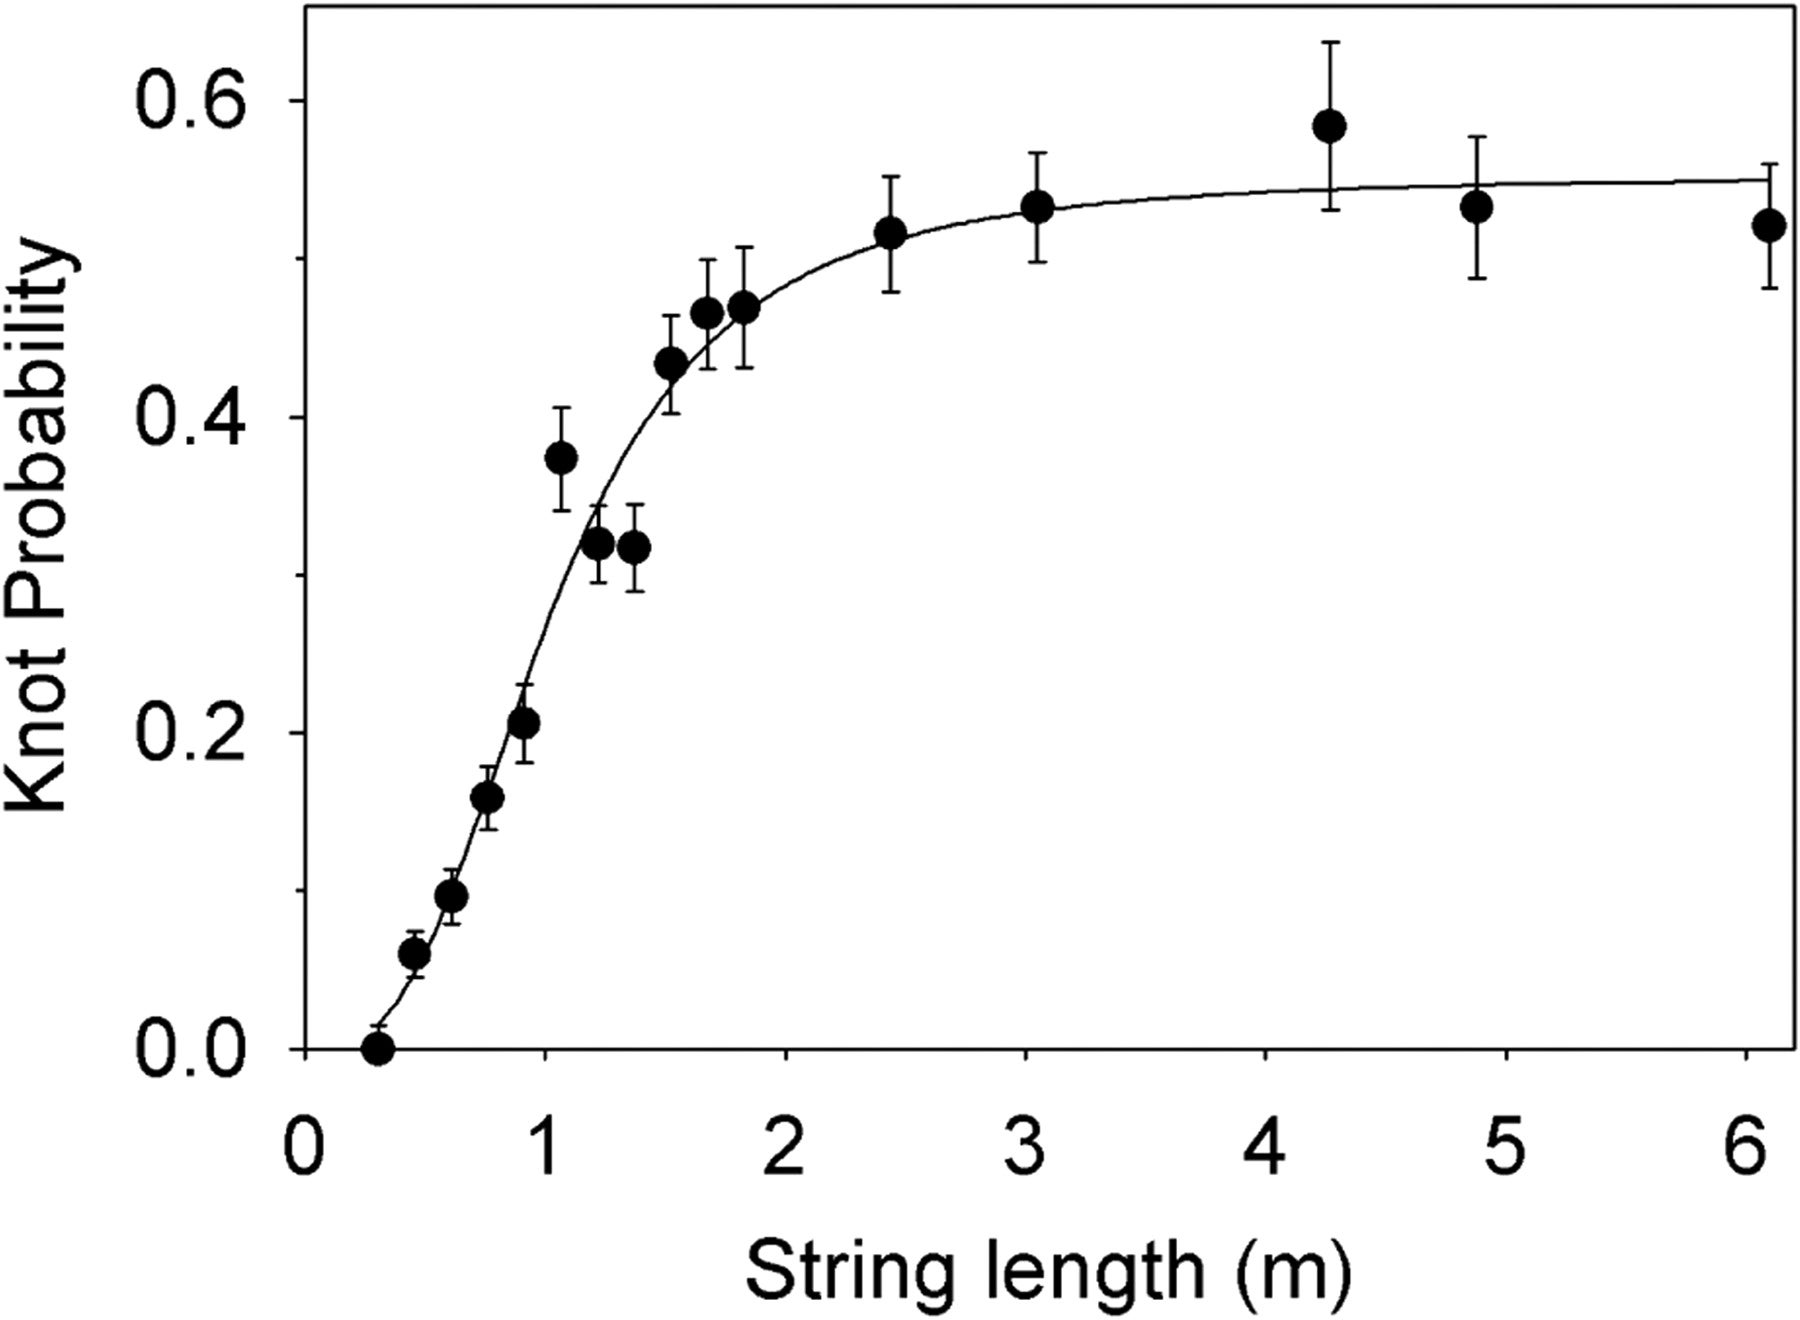 The probability of knot forming versus string length.